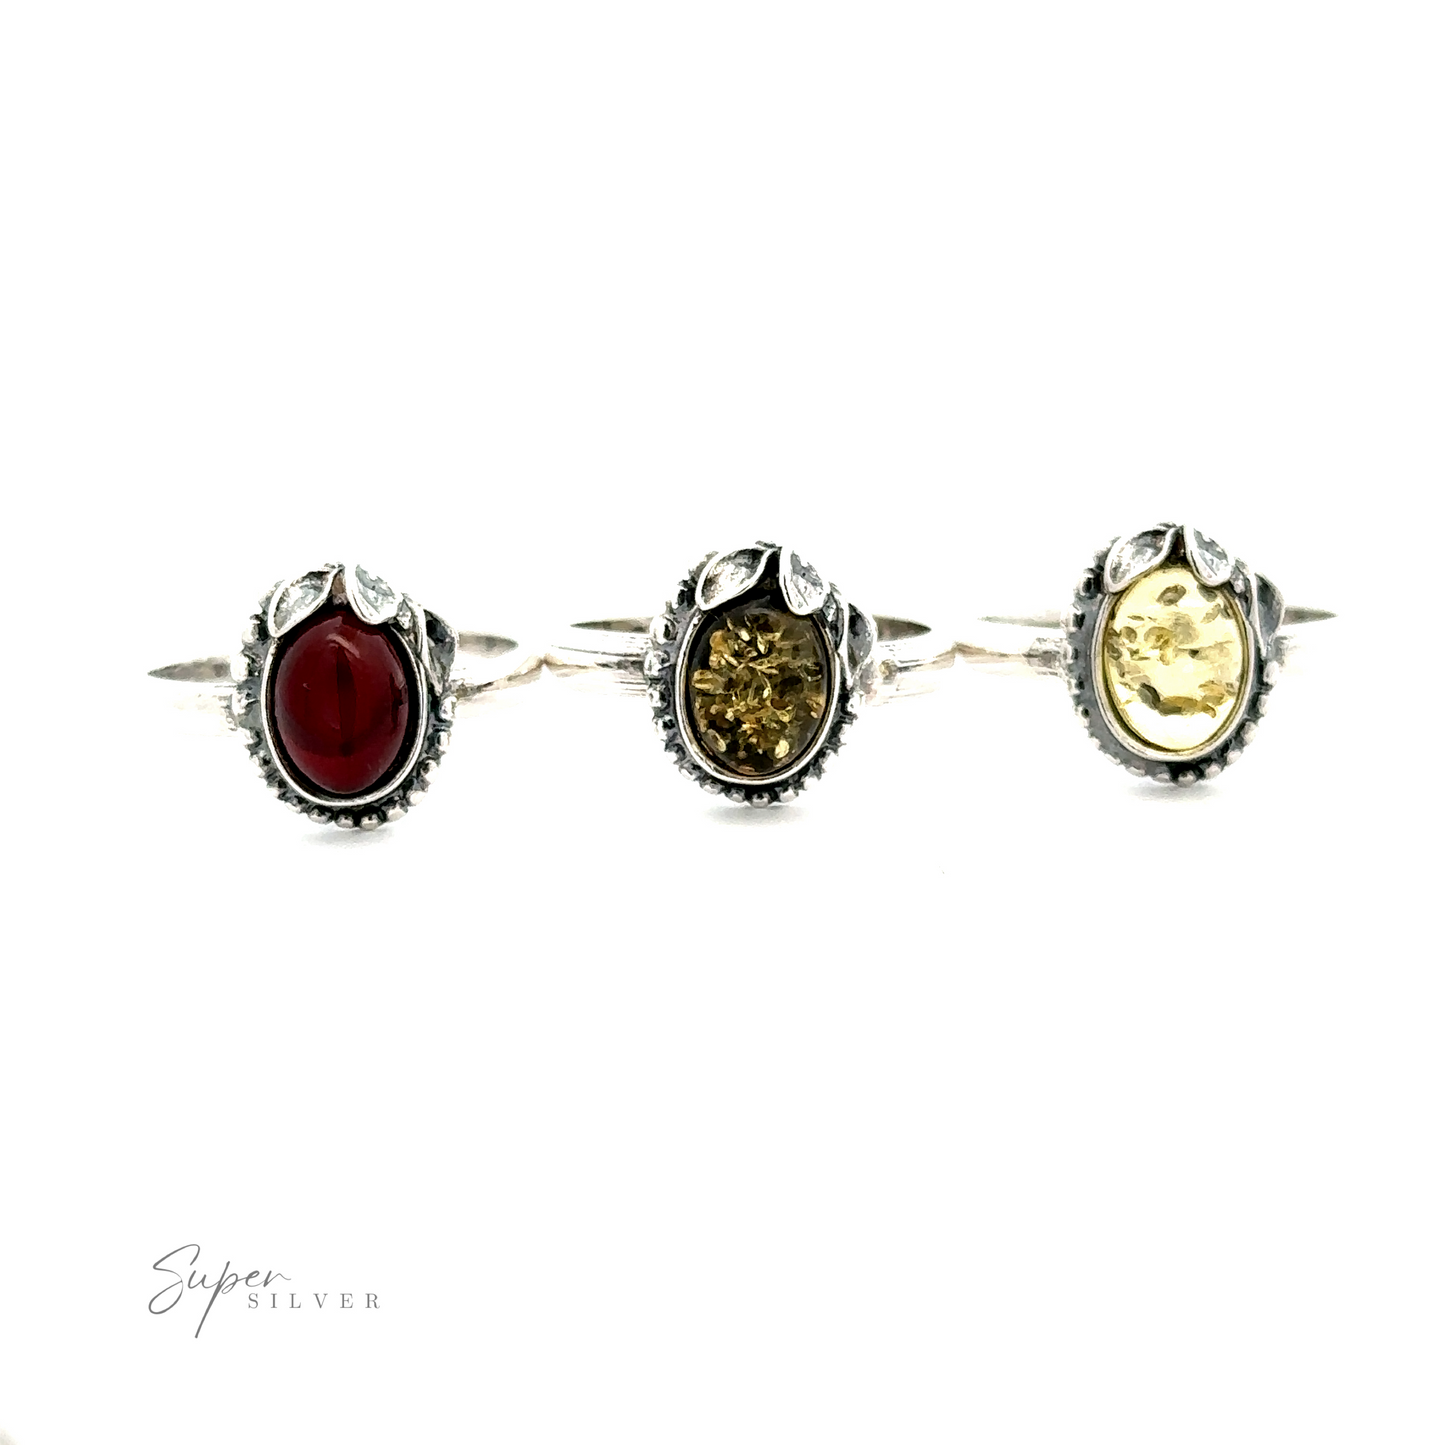 
                  
                    Three silver rings with ornate designs, each featuring an oval gemstone, exude vintage elegance. The gemstones are red, amber, and yellow in color. The Amber Ring with Beaded Border and Peace Lily Details stands out as a true piece of nature-inspired jewelry.
                  
                